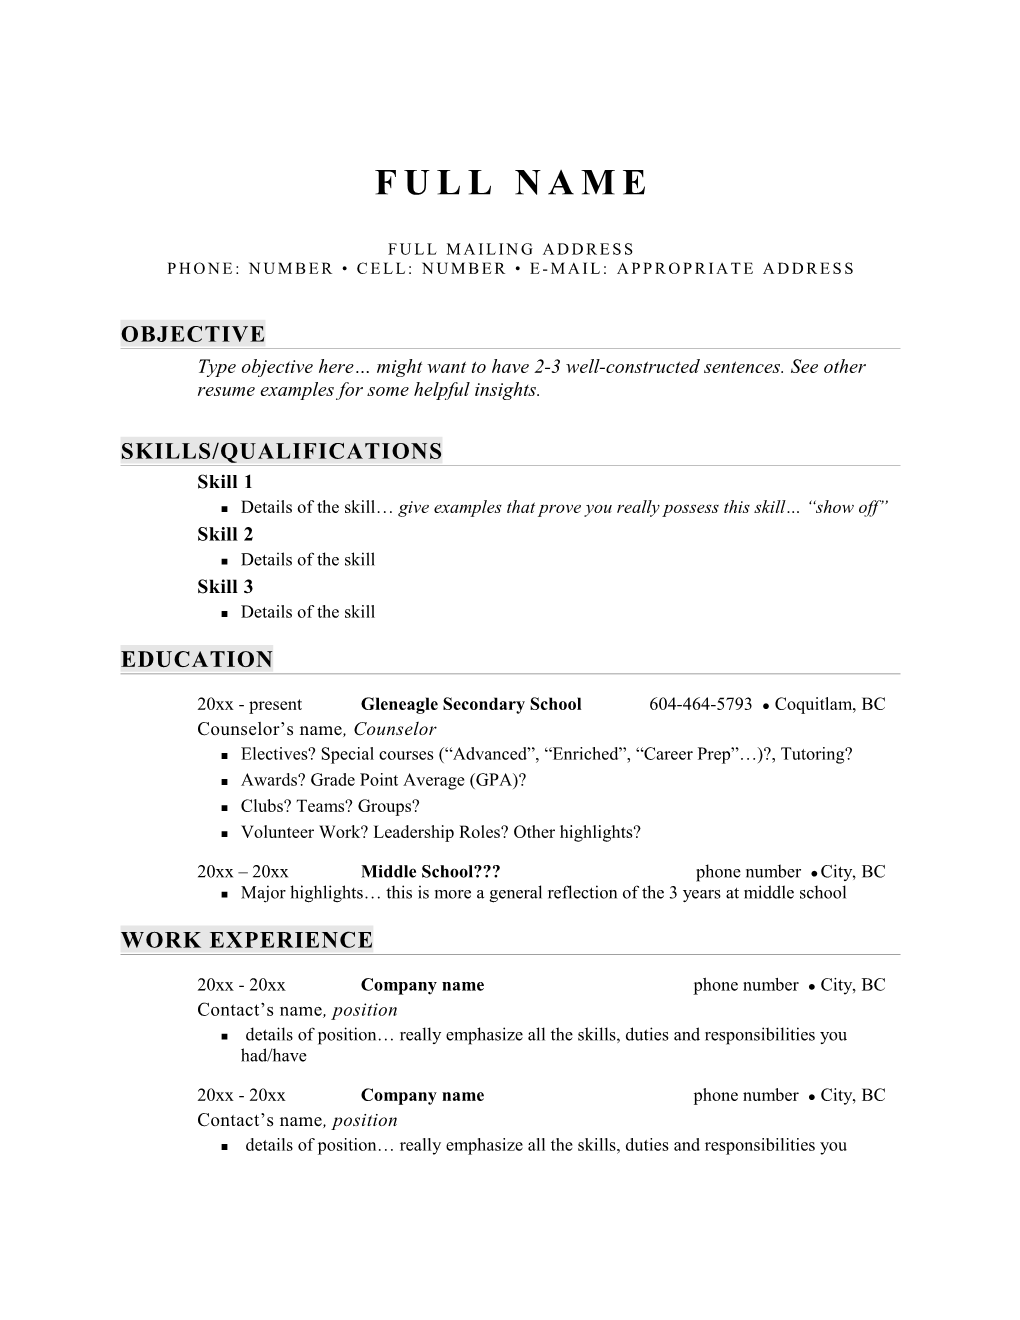 Resume of Your Name Page 2 of 2